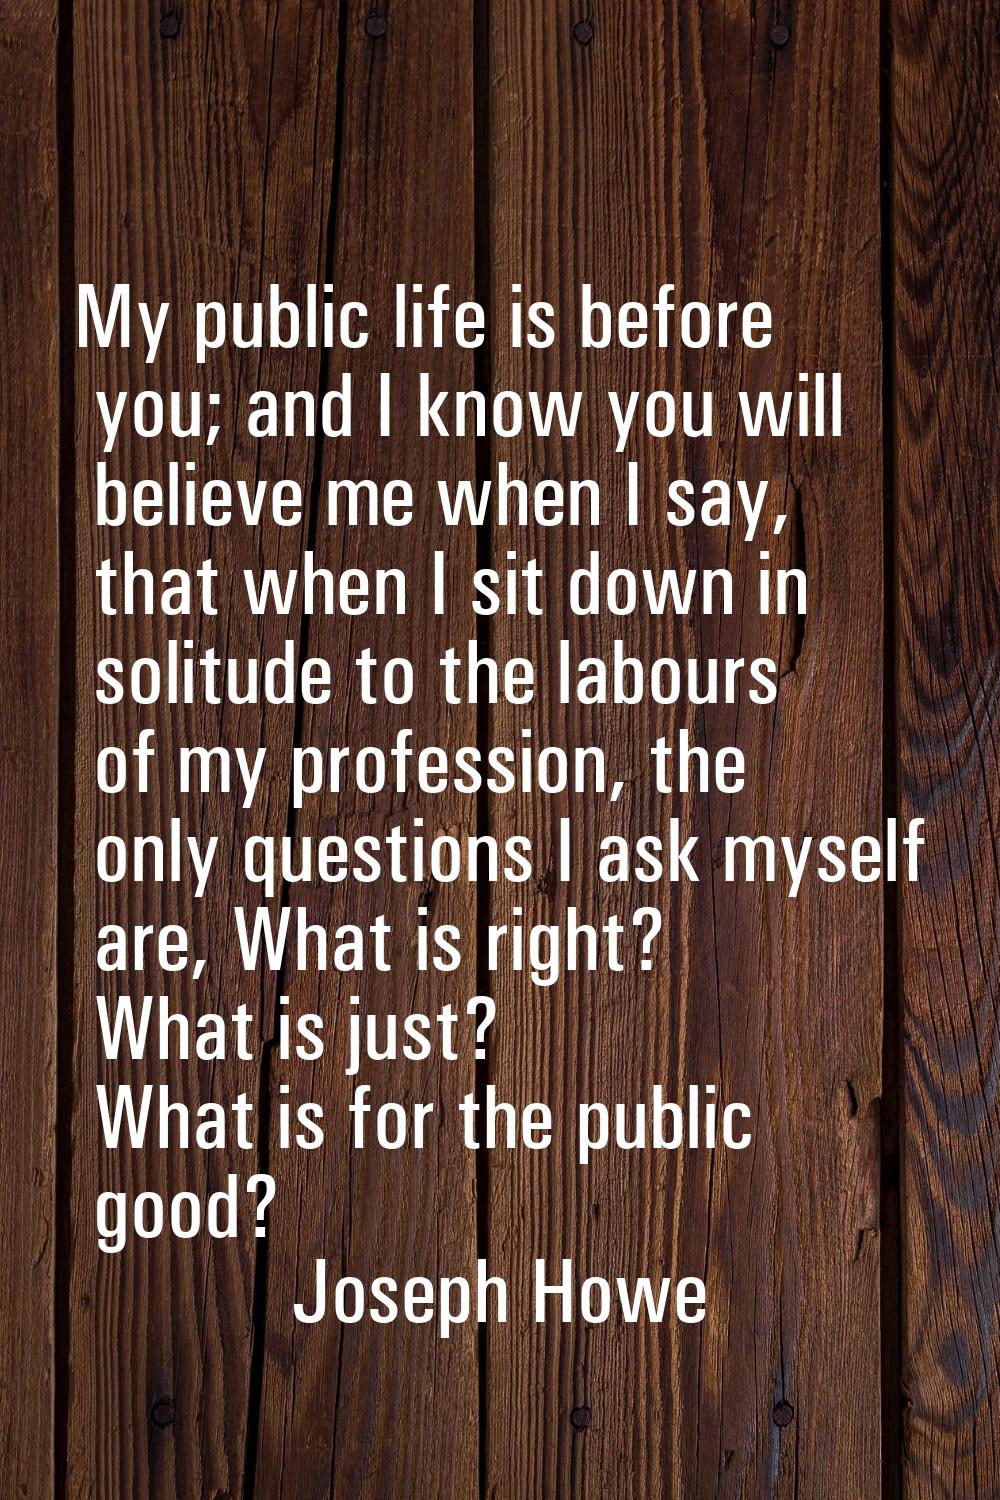 My public life is before you; and I know you will believe me when I say, that when I sit down in so